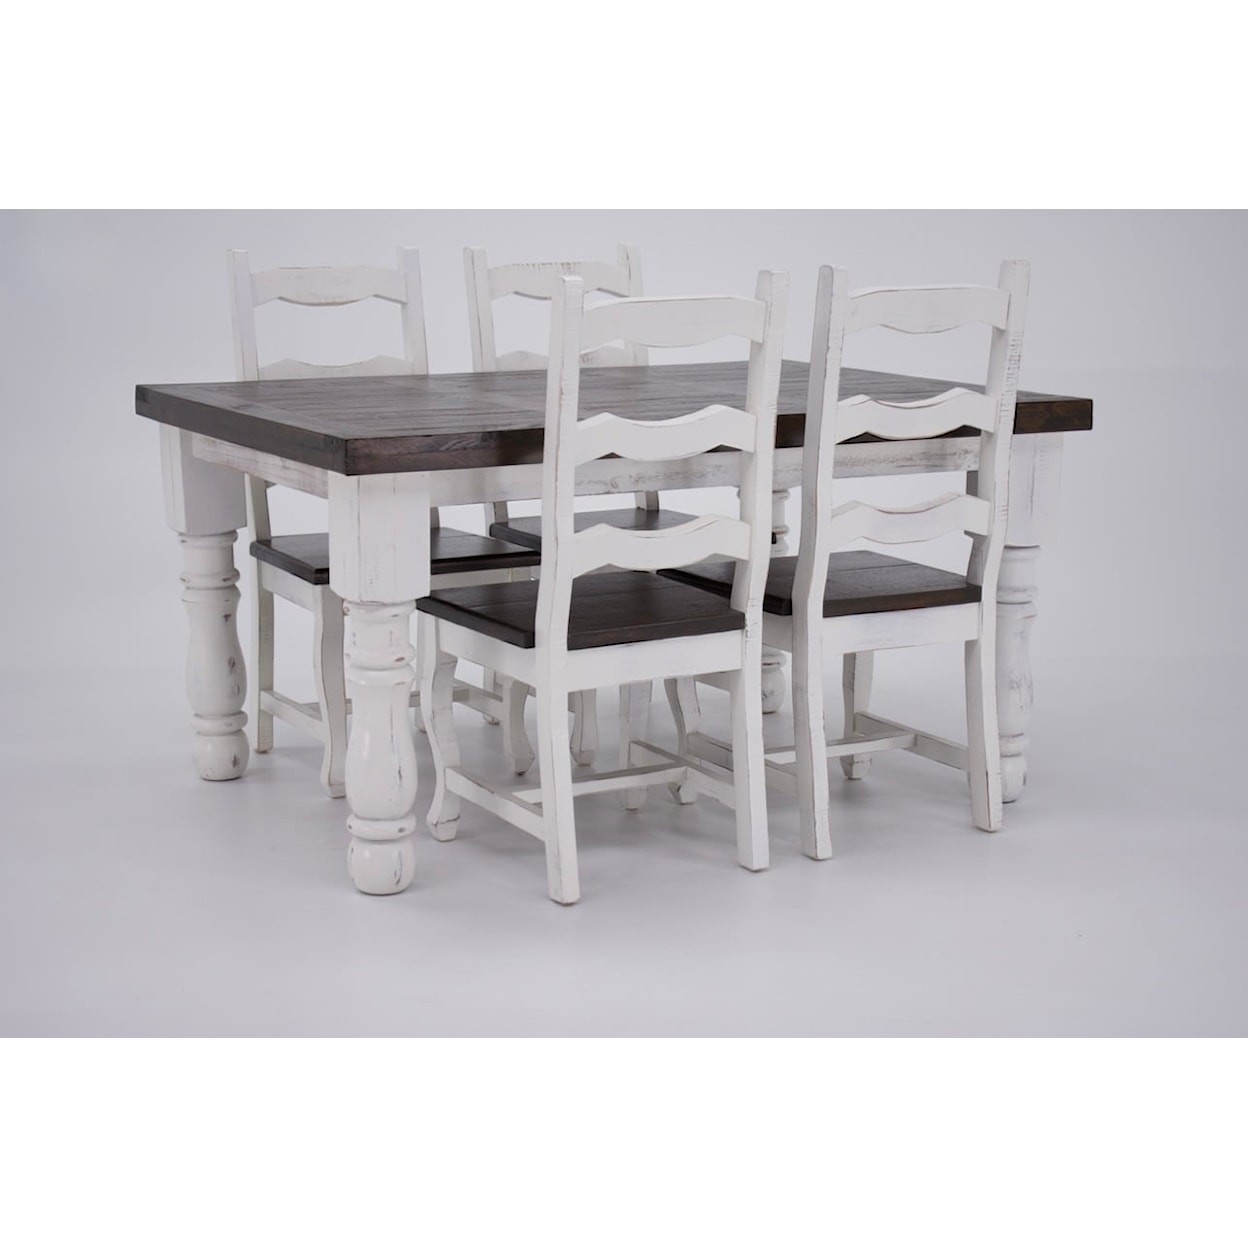 Vintage MANSION Mansion Dining Table & 4 Chairs